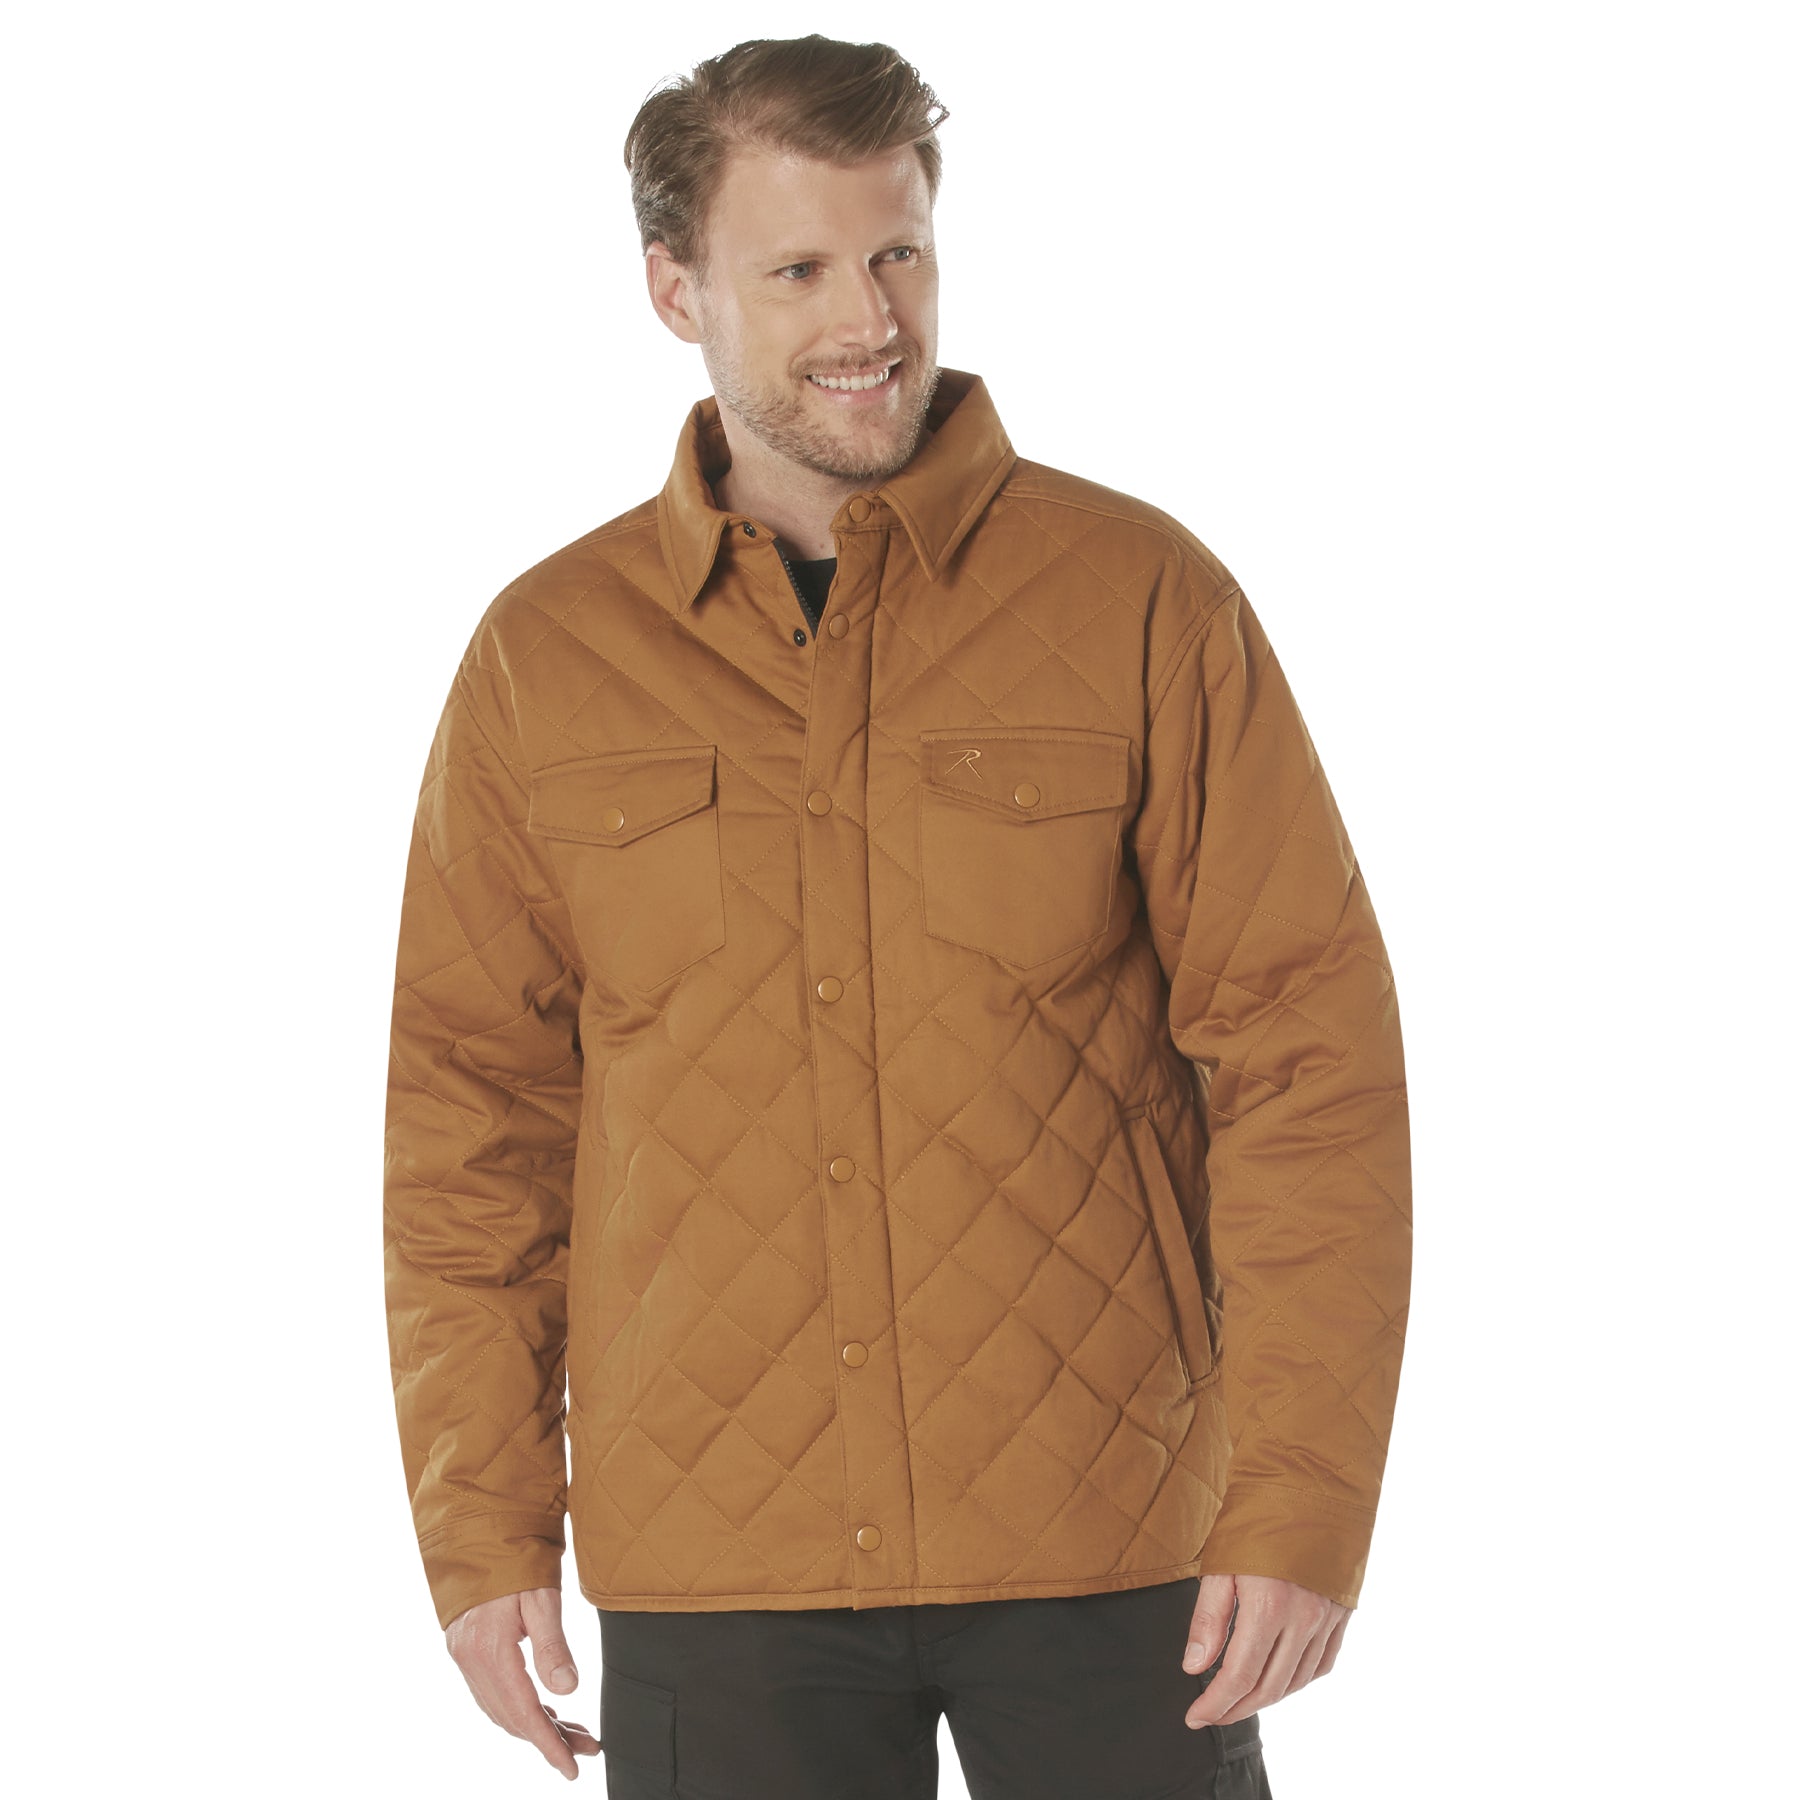 Rothco Diamond Quilted Cotton Jacket - Tactical Choice Plus